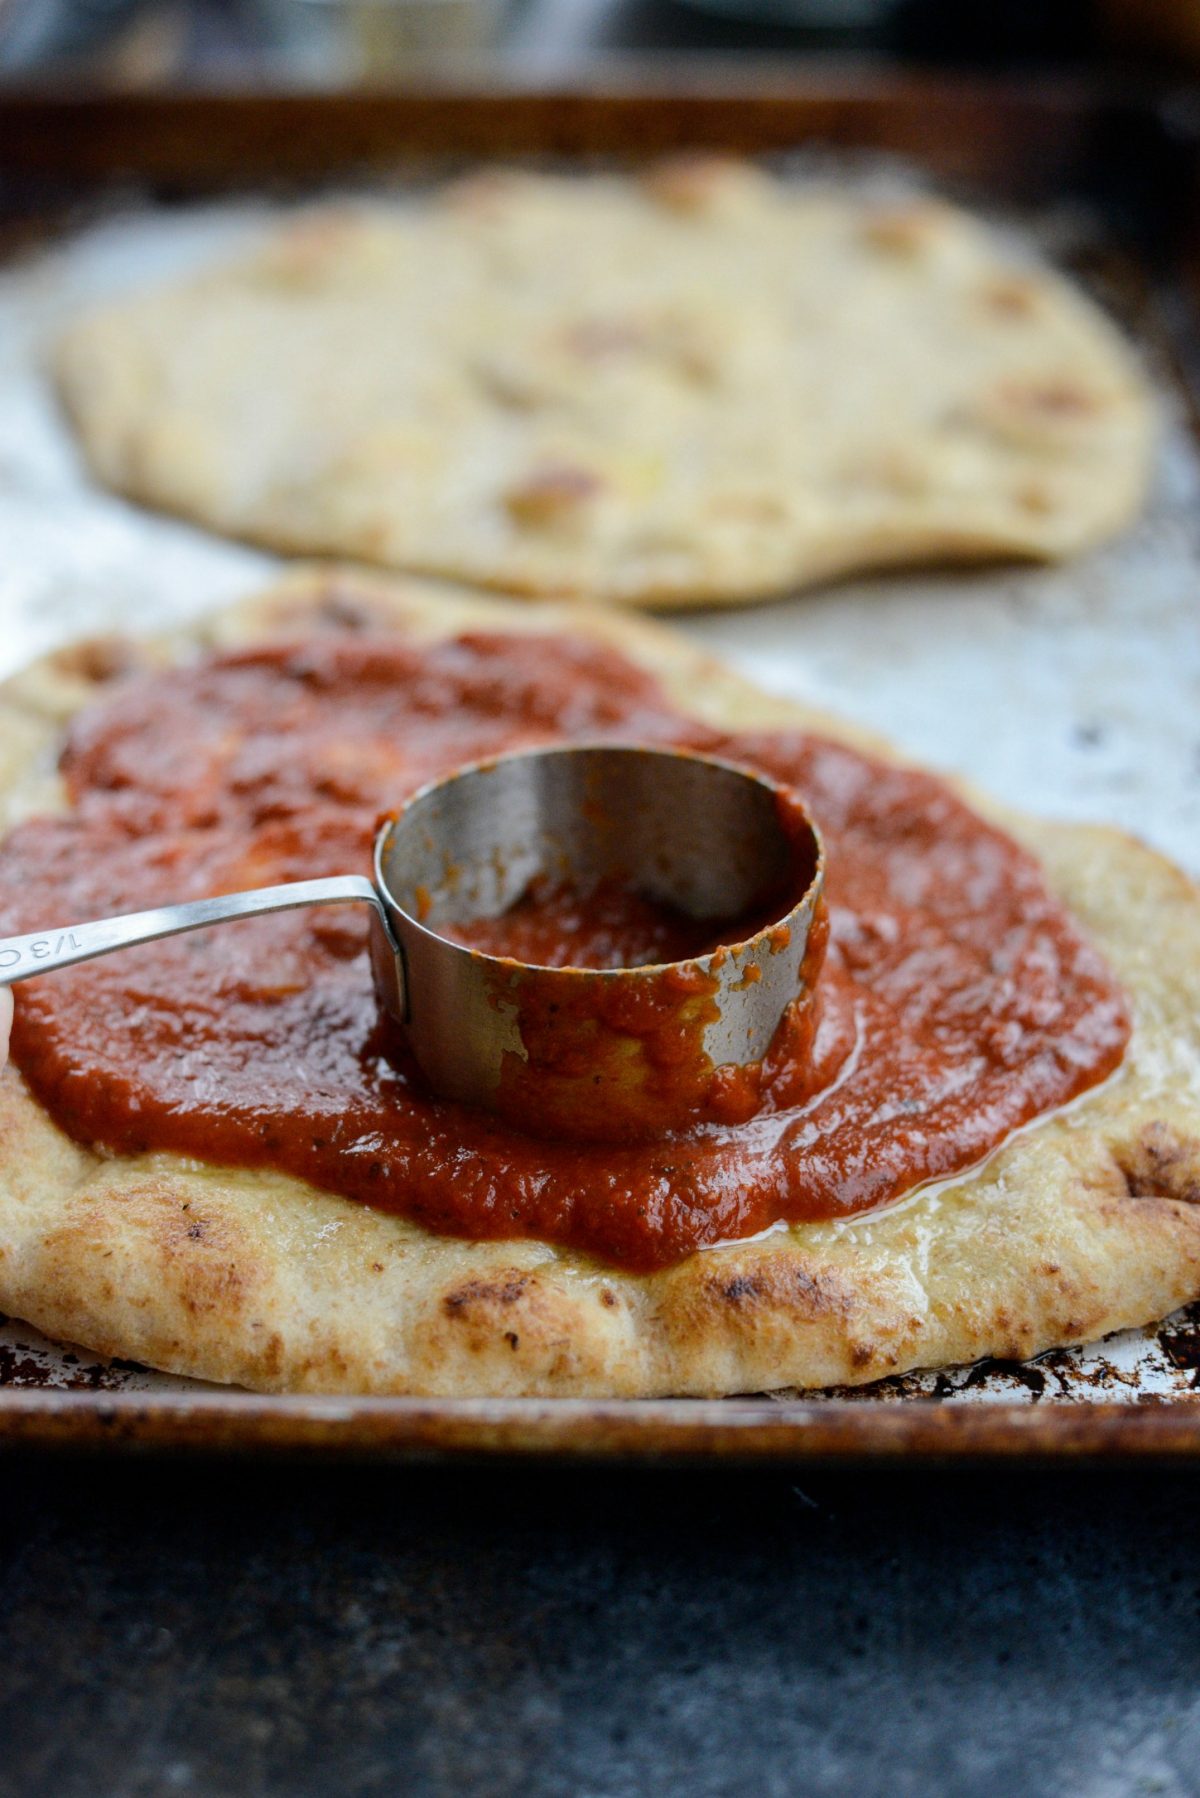 Spread the marinara evenly on the naan